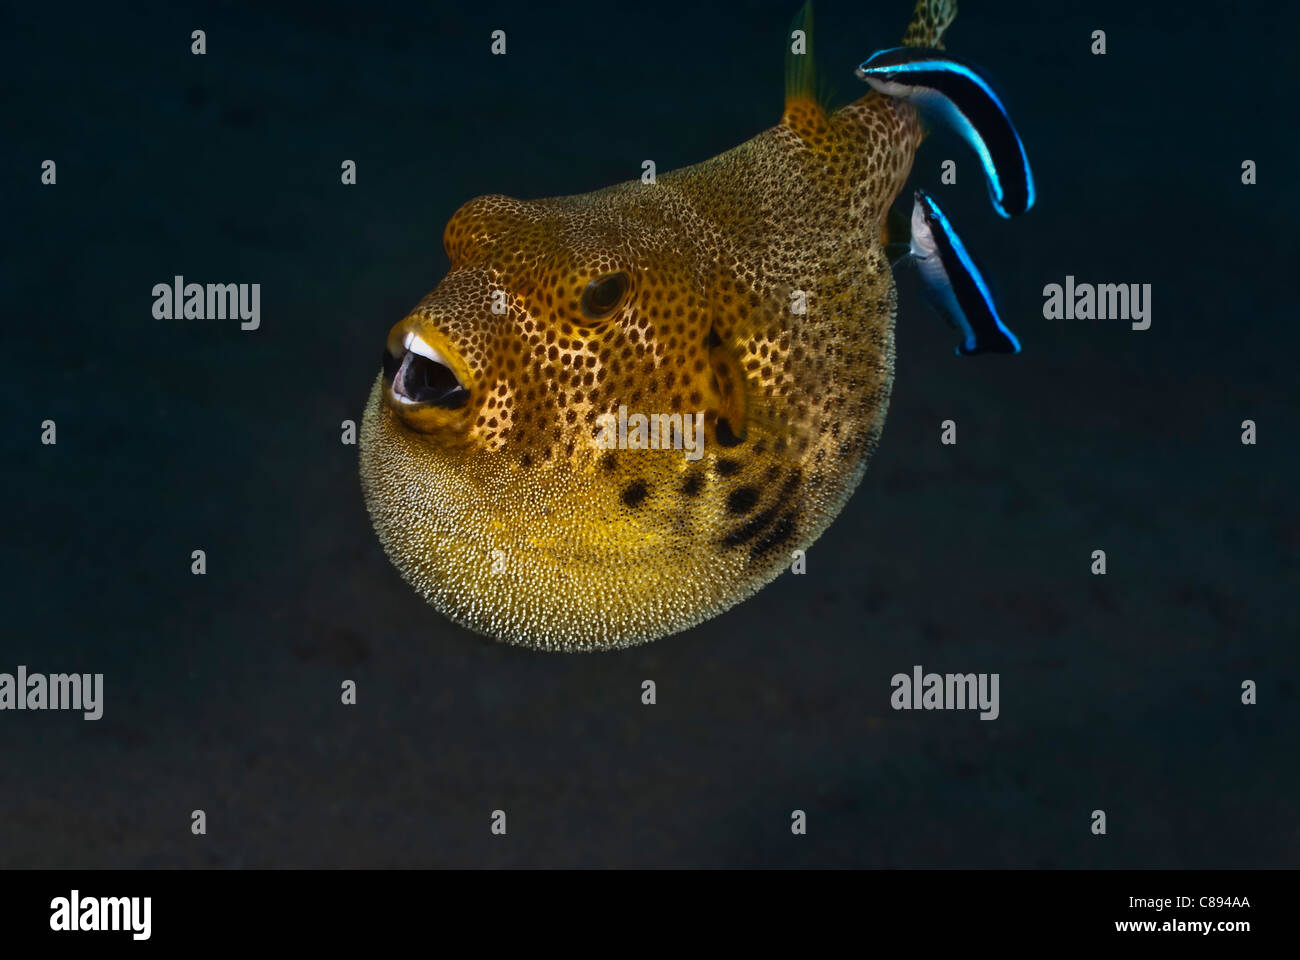 Puffed up Juvenile Starry Pufferfish with cleaner wrasse under water. Stock Photo